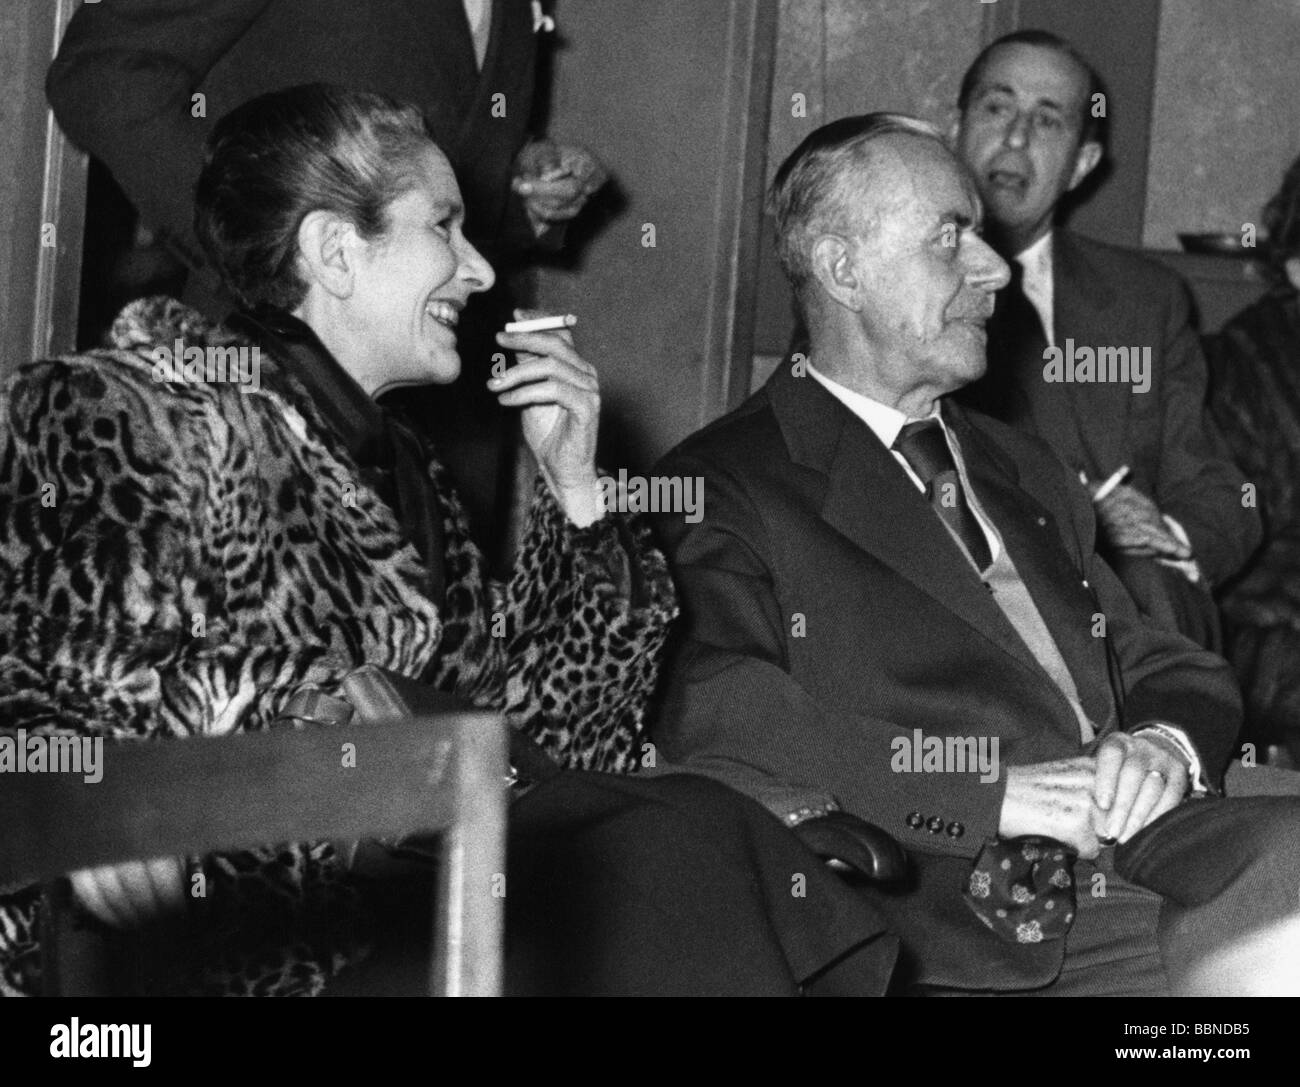 Mann, Thomas, 6.6.1875 - 12.8.1955, German author / writer, Nobel Prize for literature 1929, half length, with his daughter Erika, during film showing of 'Königliche Hoheit', circa 1953, Stock Photo